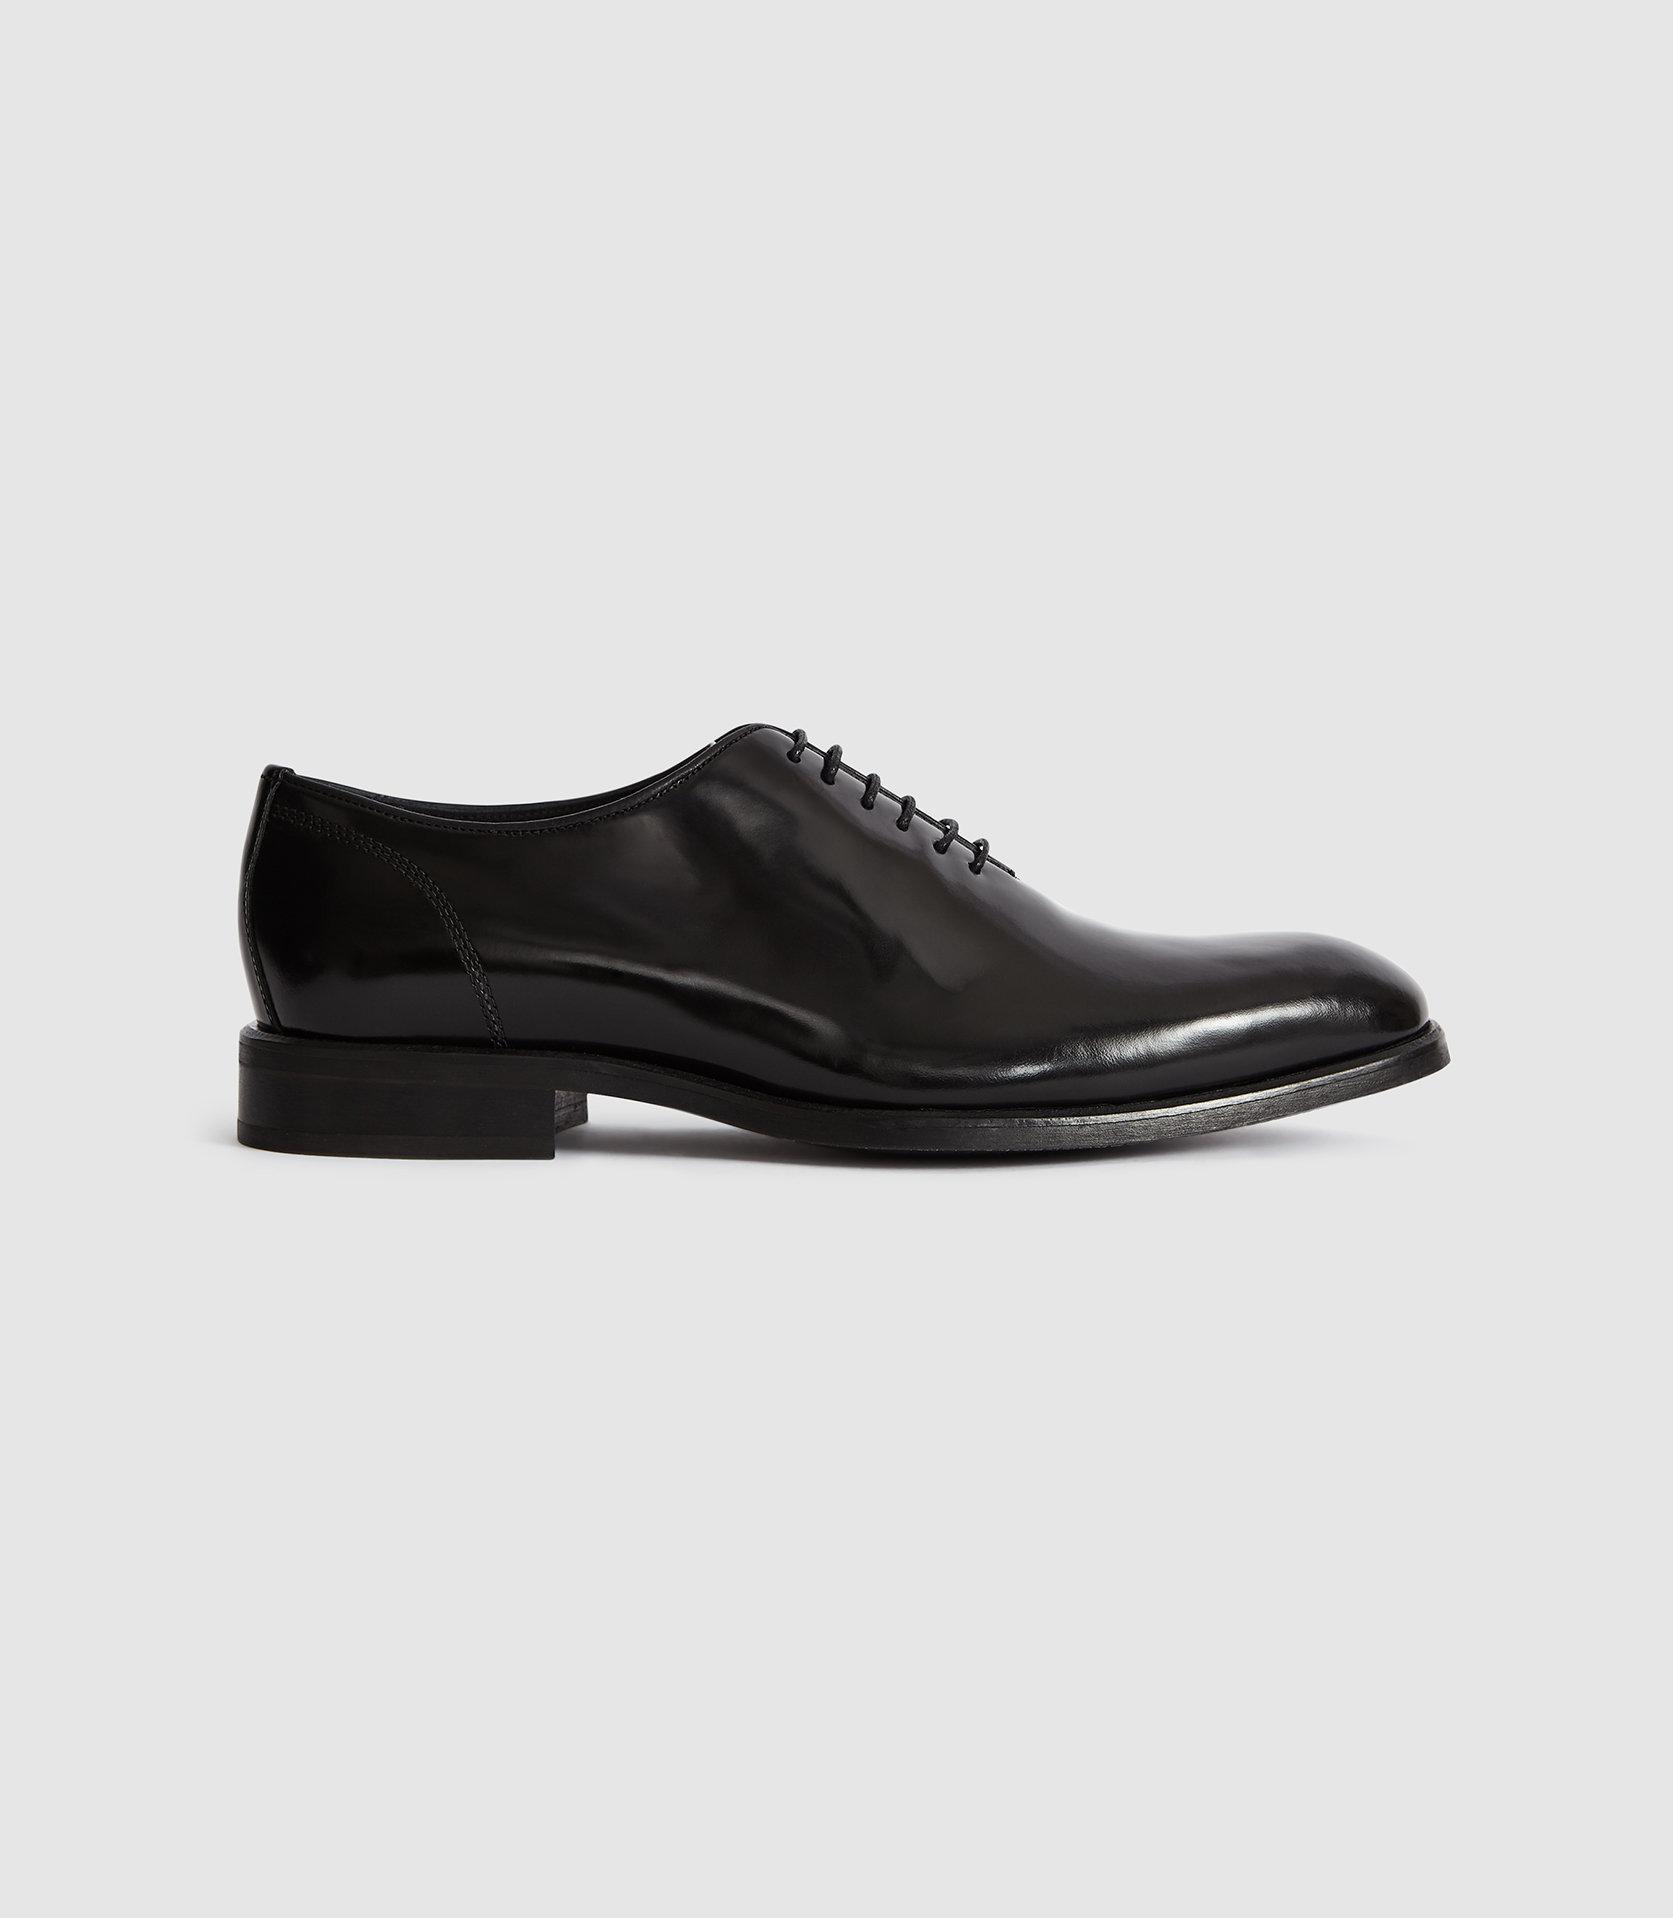 Reiss Domonic - Patent Leather Whole Cut Shoes in Black for Men - Save ...